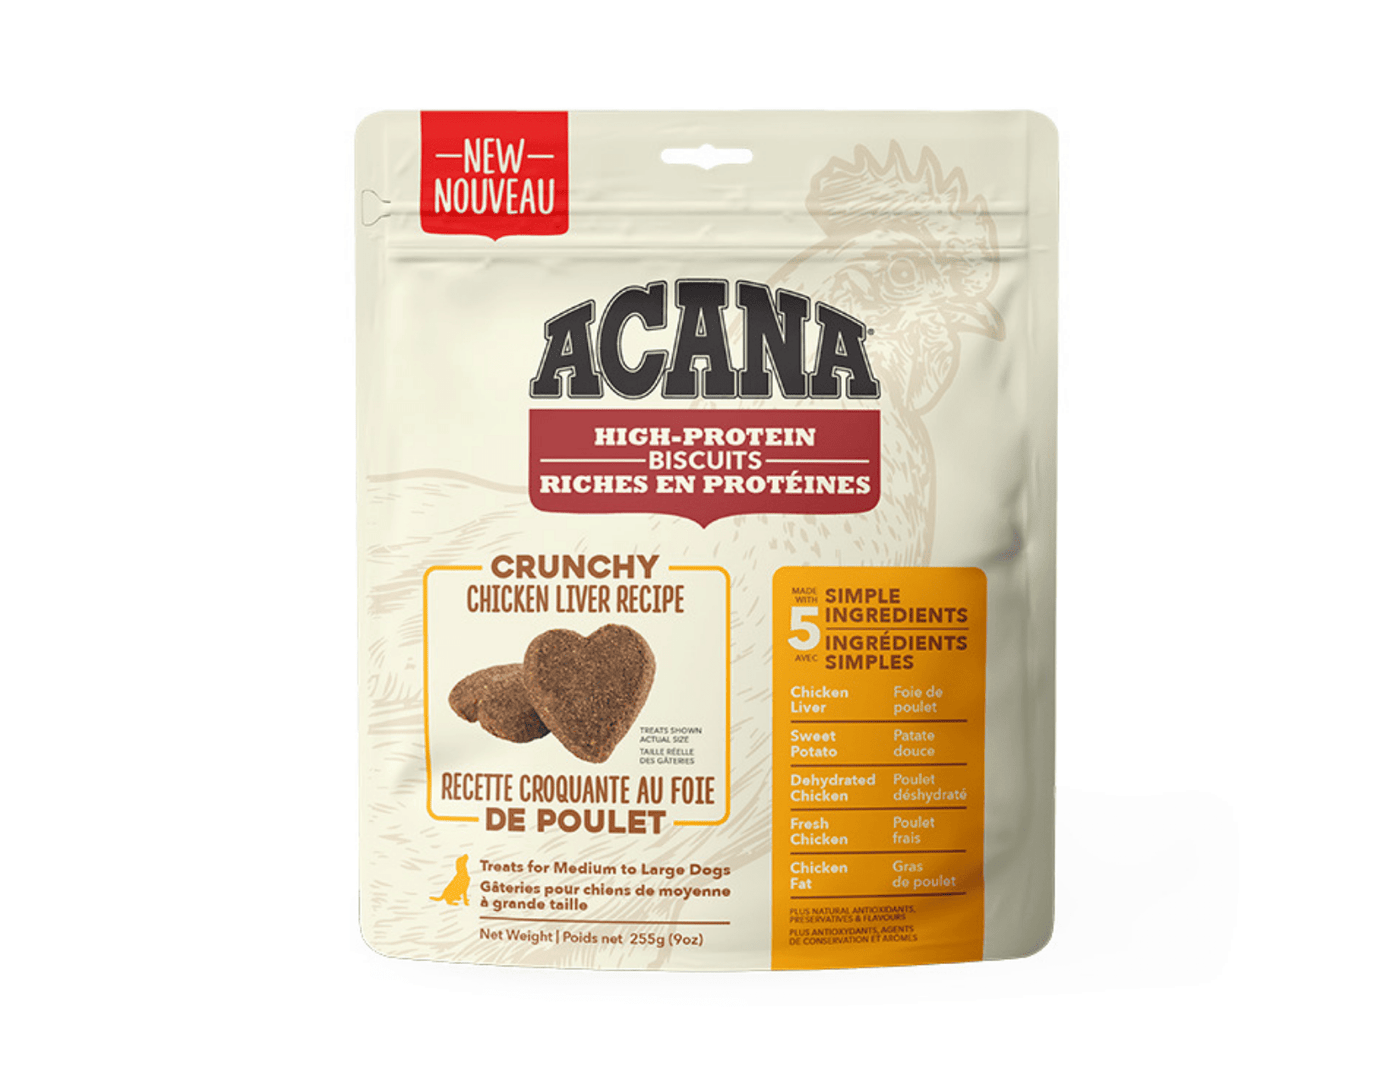 Acana High-Protein Biscuits for Medium to Large Dogs - Crunchy Chicken Liver Recipe 225g - Dog Treats - ACANA - PetToba-ACANA